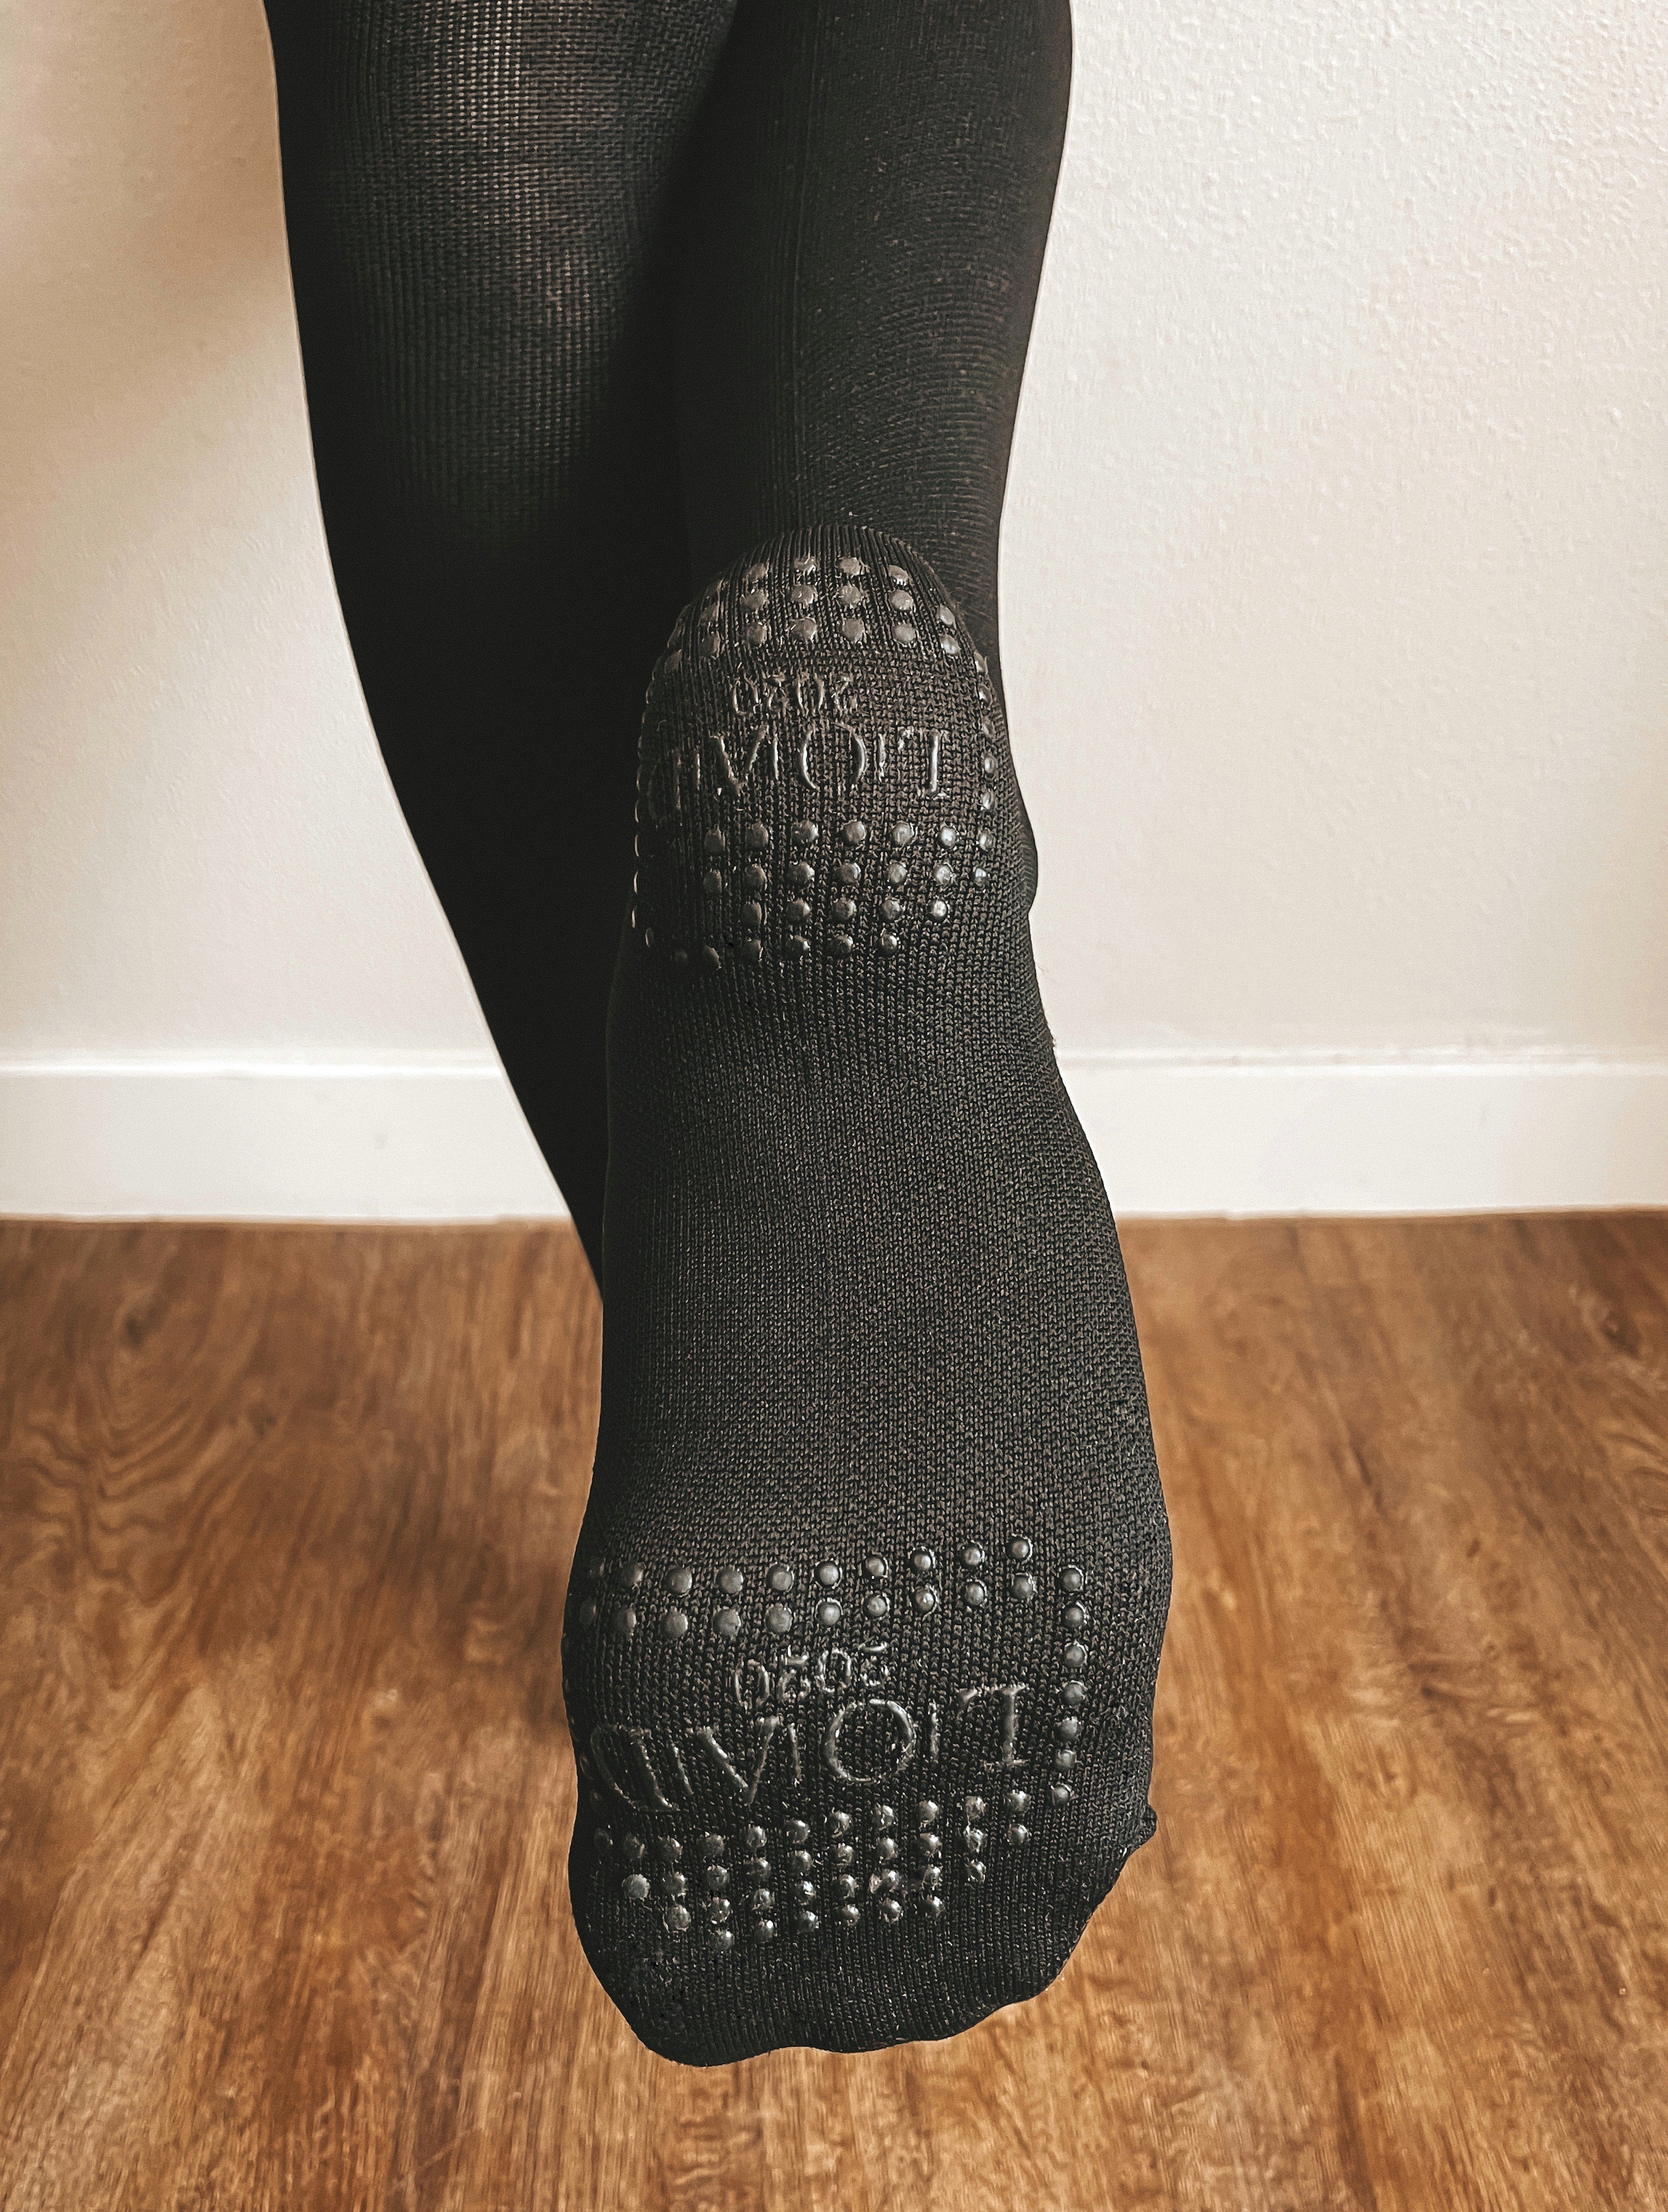 Over Knee Socks by L.O.A.D